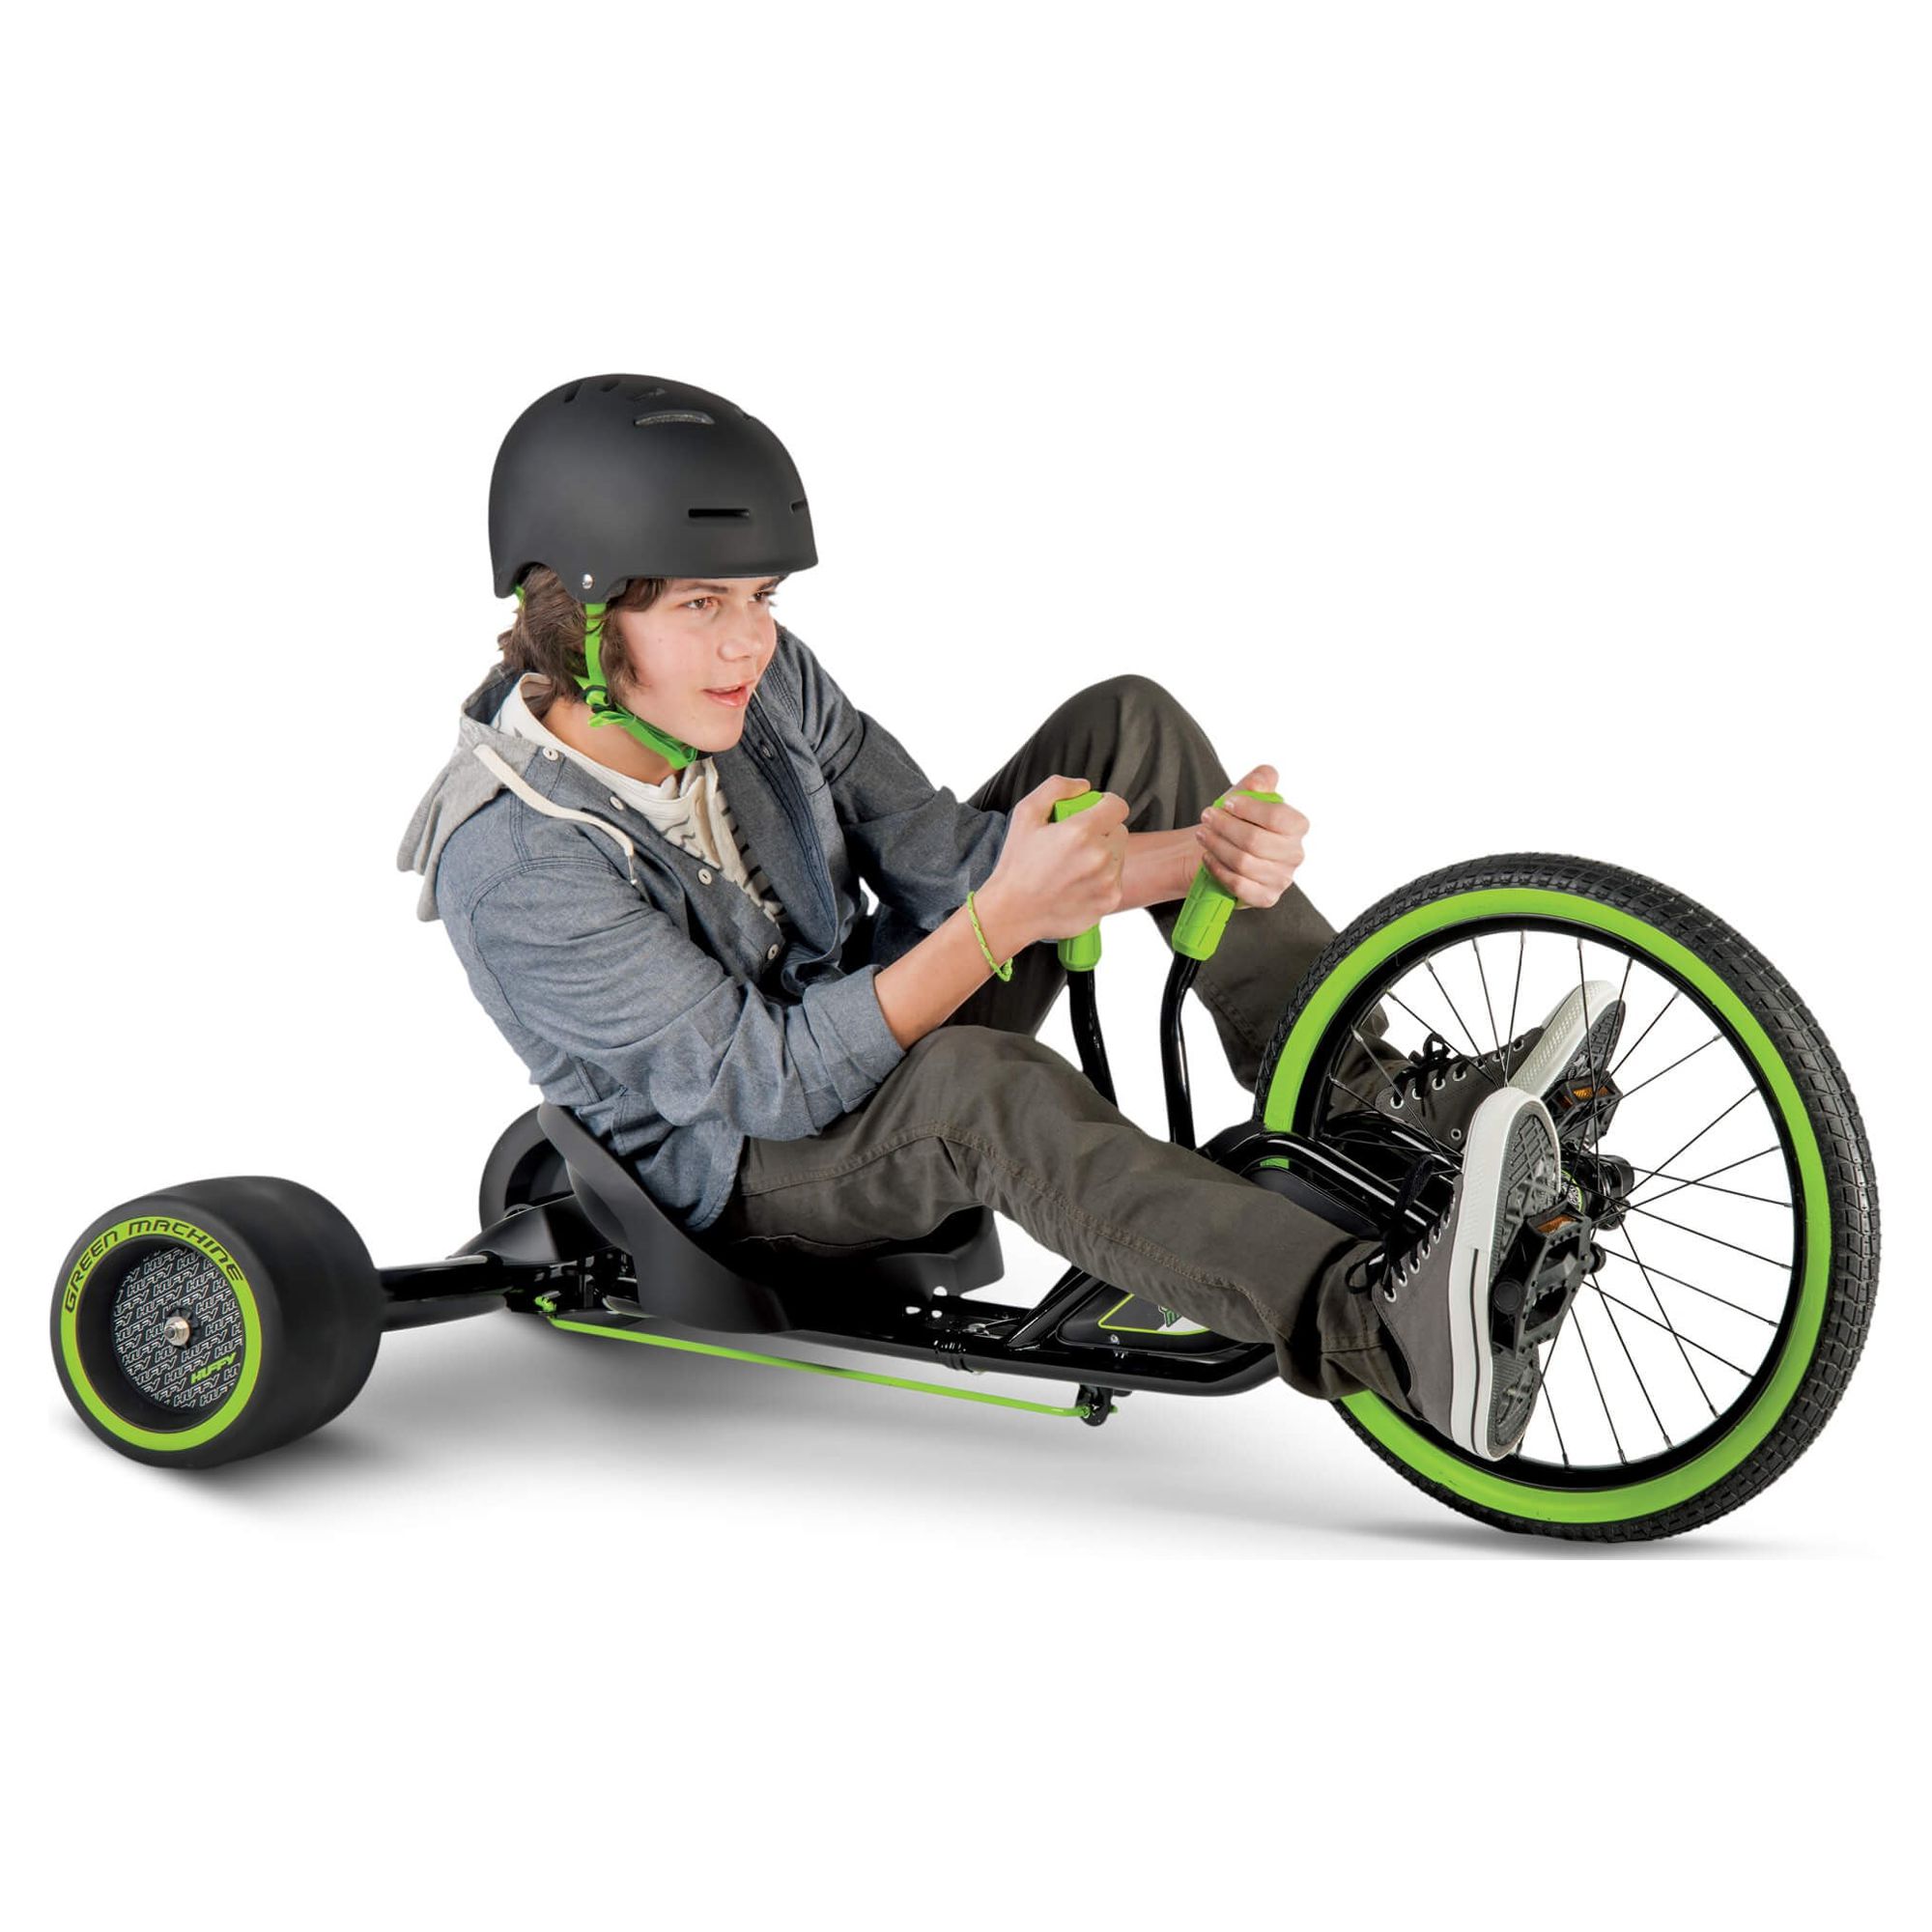 Huffy Green Machine RT 20-Inch 3-Wheel Tricycle in Green and Black - image 1 of 4